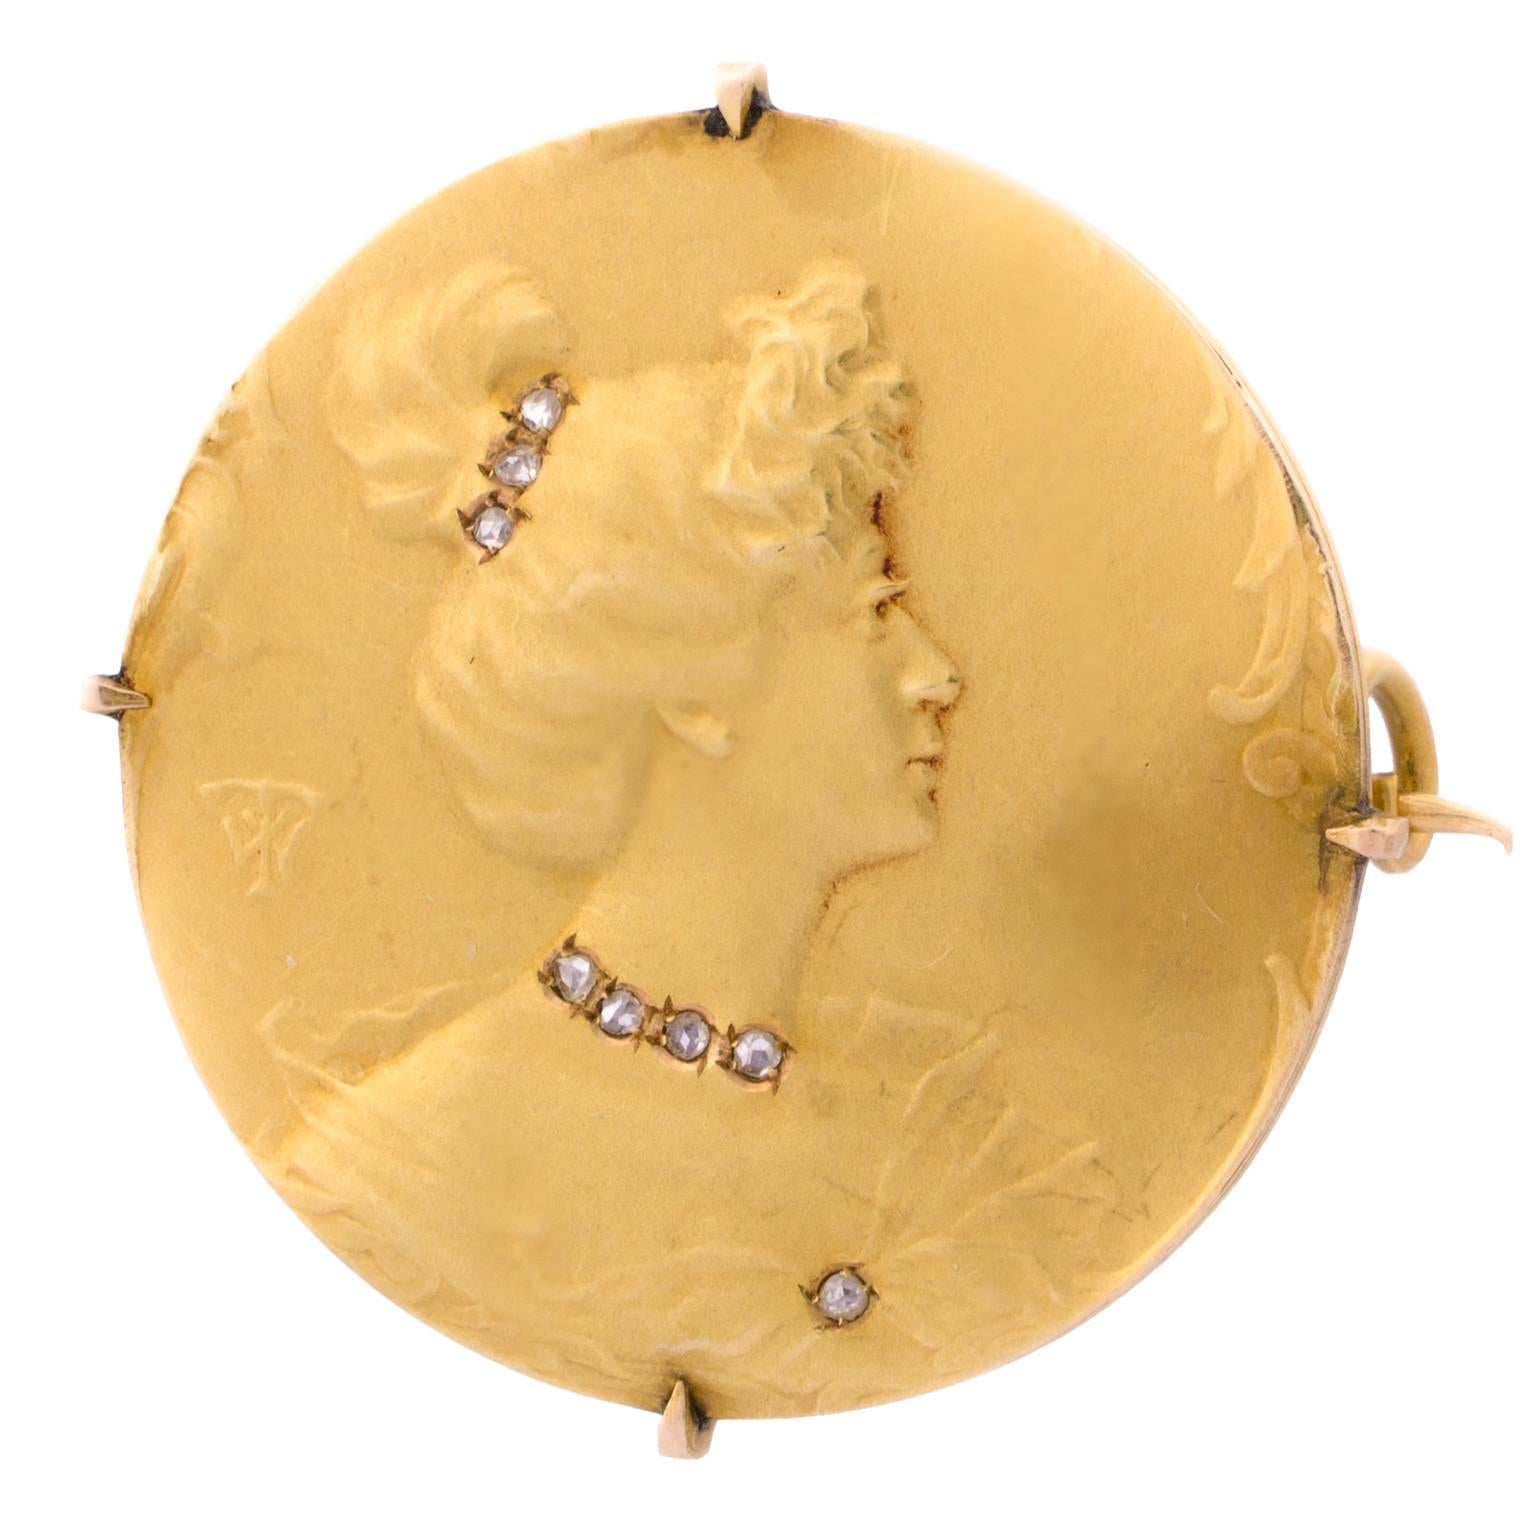 Late 19th century Art Nouveau brooch in matte gold with a female bust relief decorated with 8 rose cut diamonds, signed with unidentified mark.